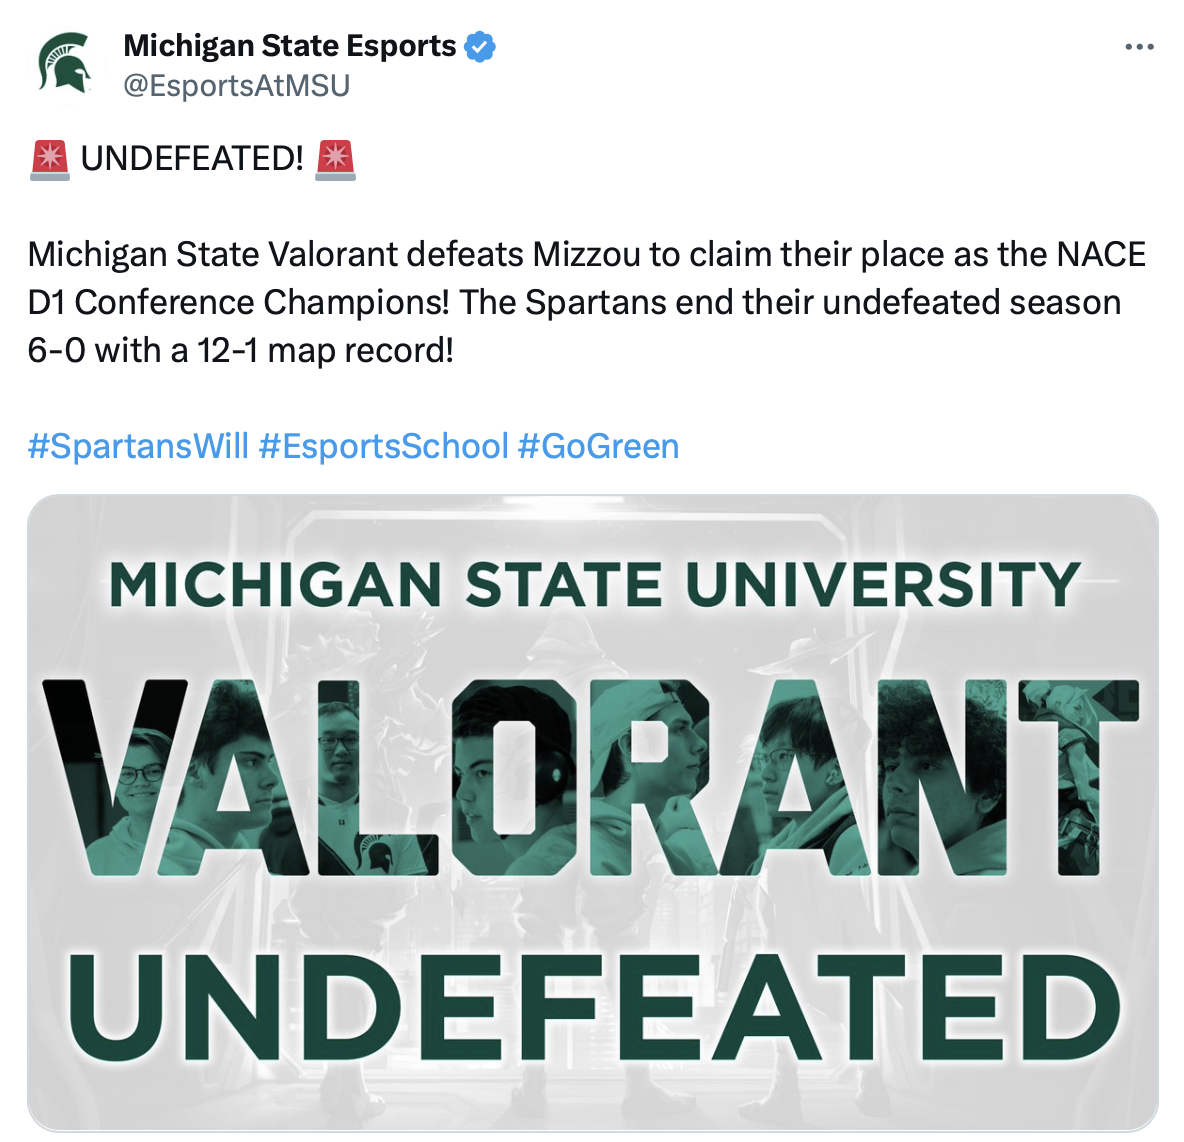 Tweet from @EsportsAtMSU: Undefeated! Michigan State Valorant defeats Mizzou to claim their place as the NACE D1 Conference Champions! The Spartans end their undefeated season 6-0 with a 12-1 map record!